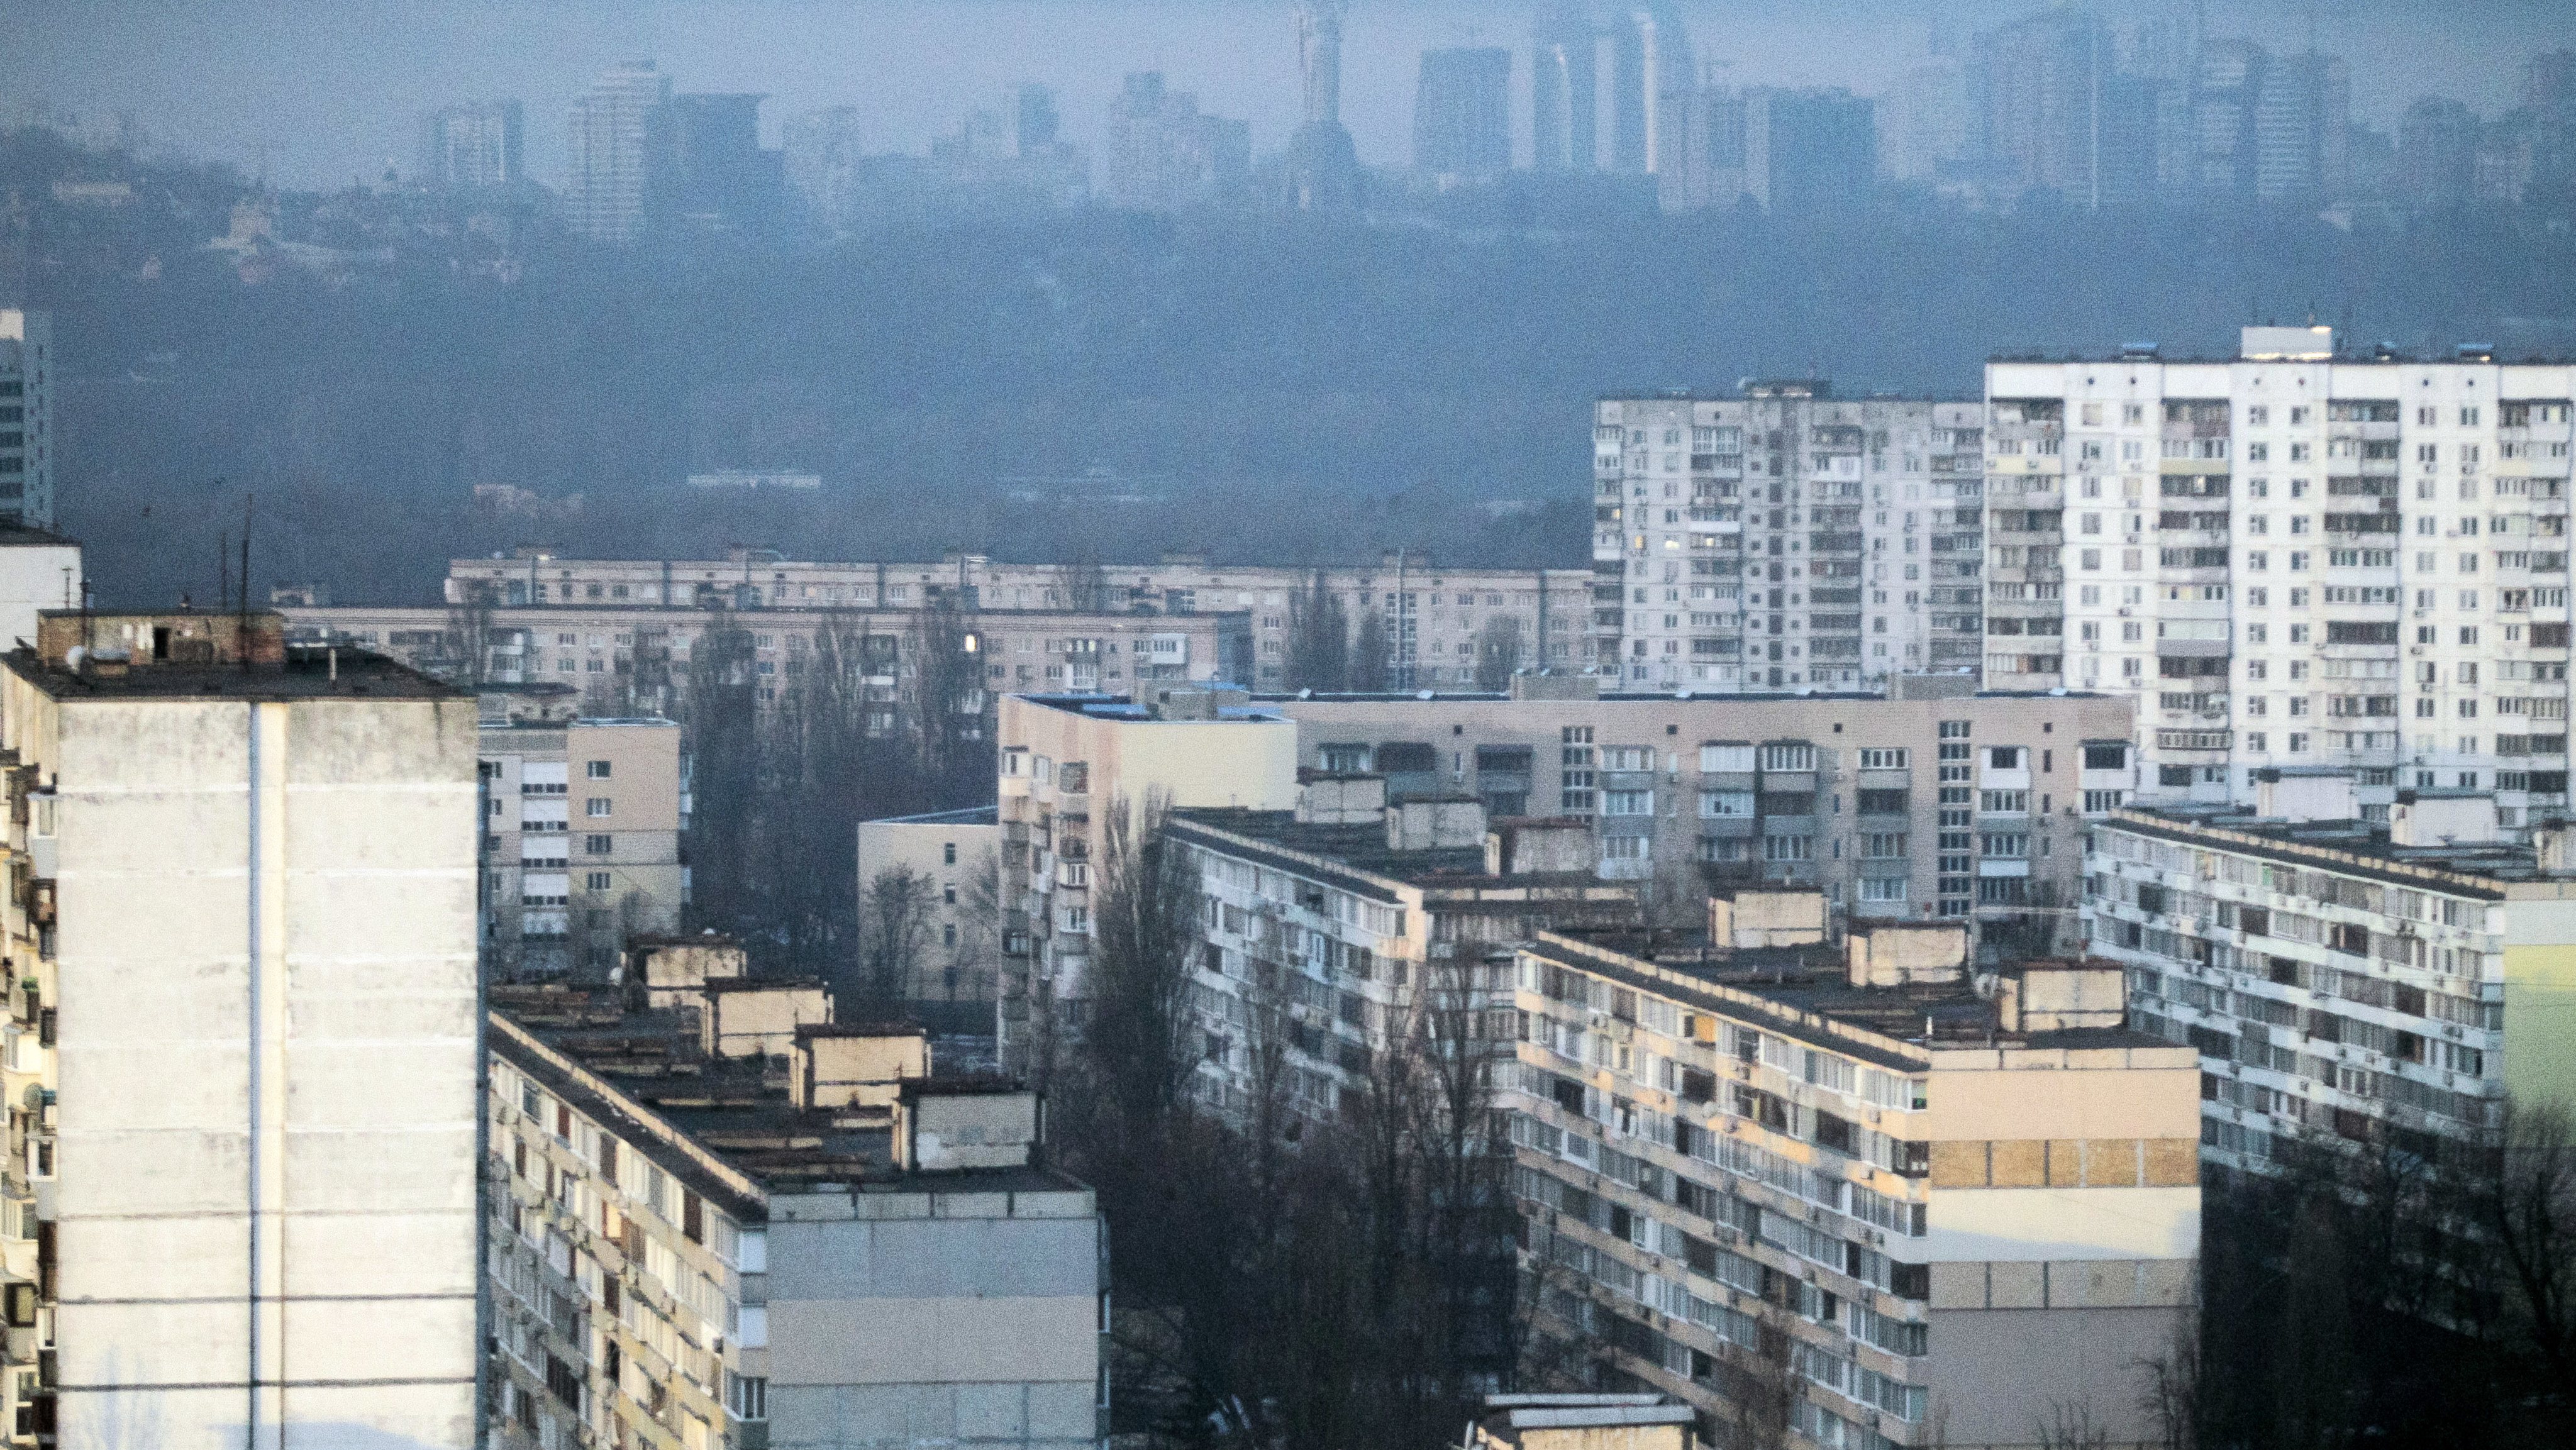 Kyiv in morning on March 12, 2022